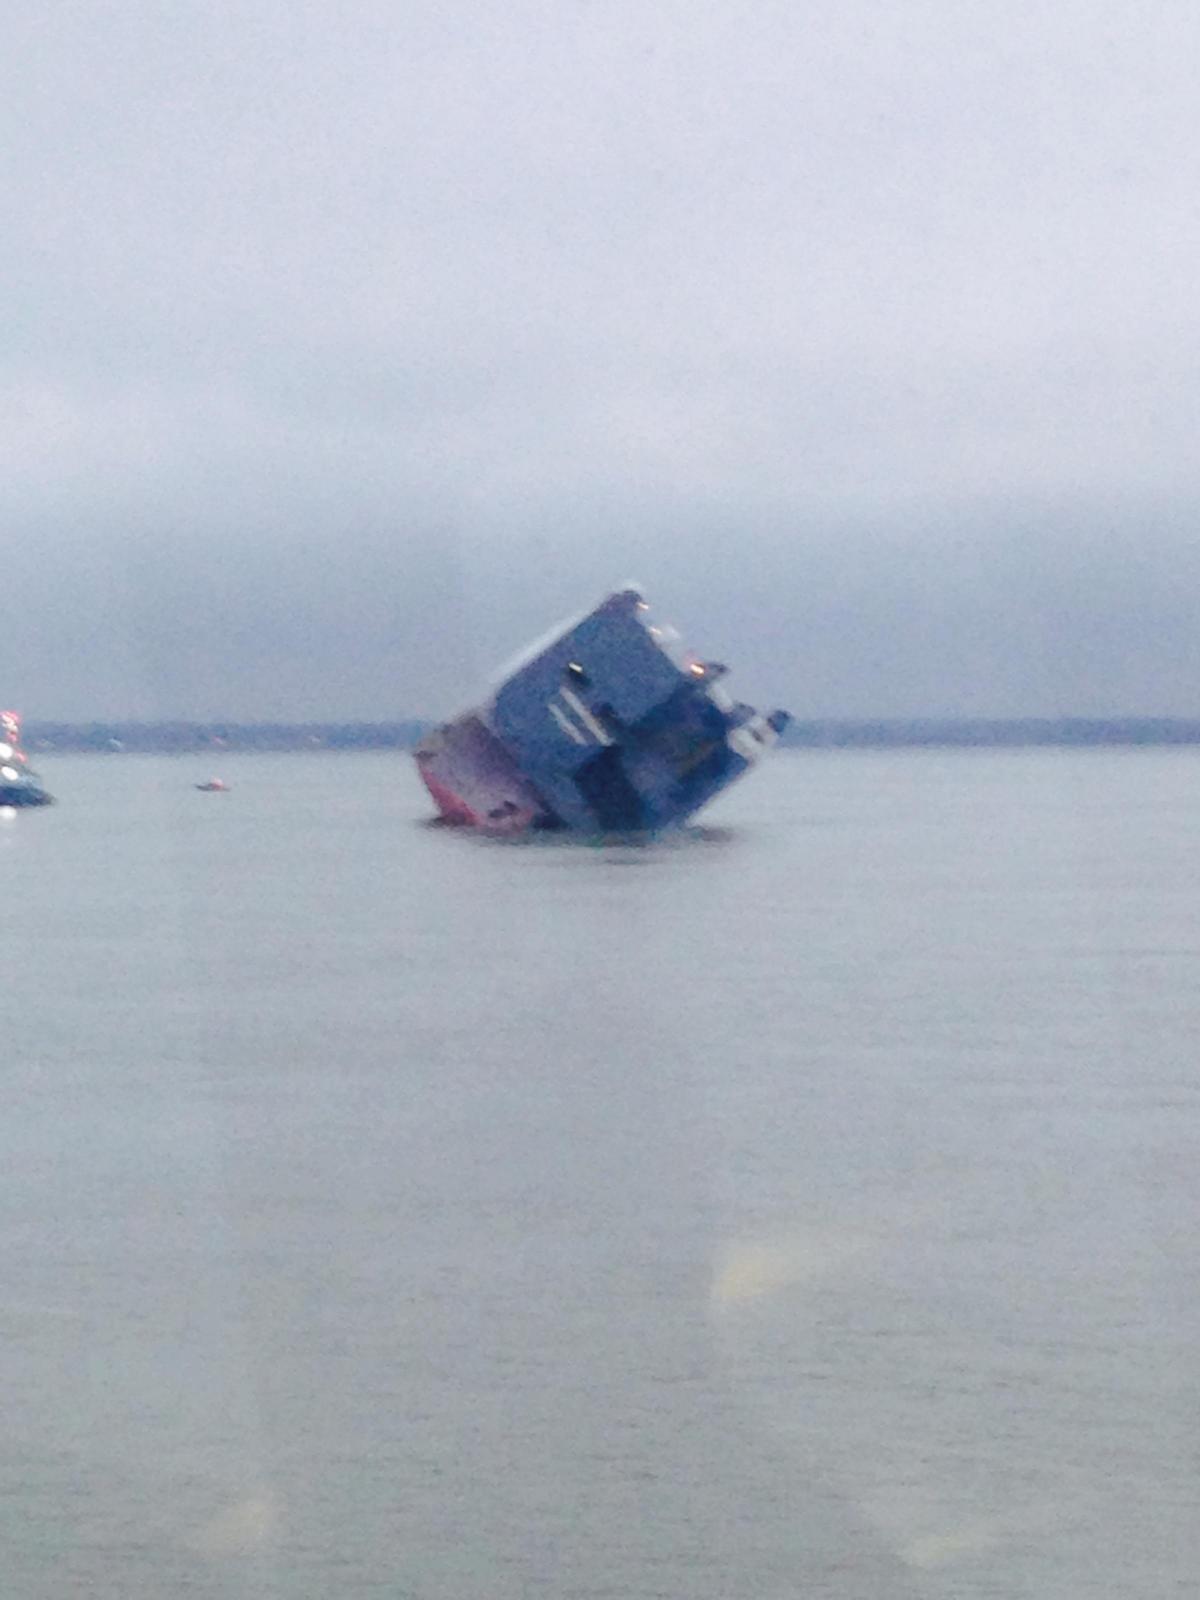 Ship runs aground at Brambles Bank of the Isle of Wight - Guy McKechnie